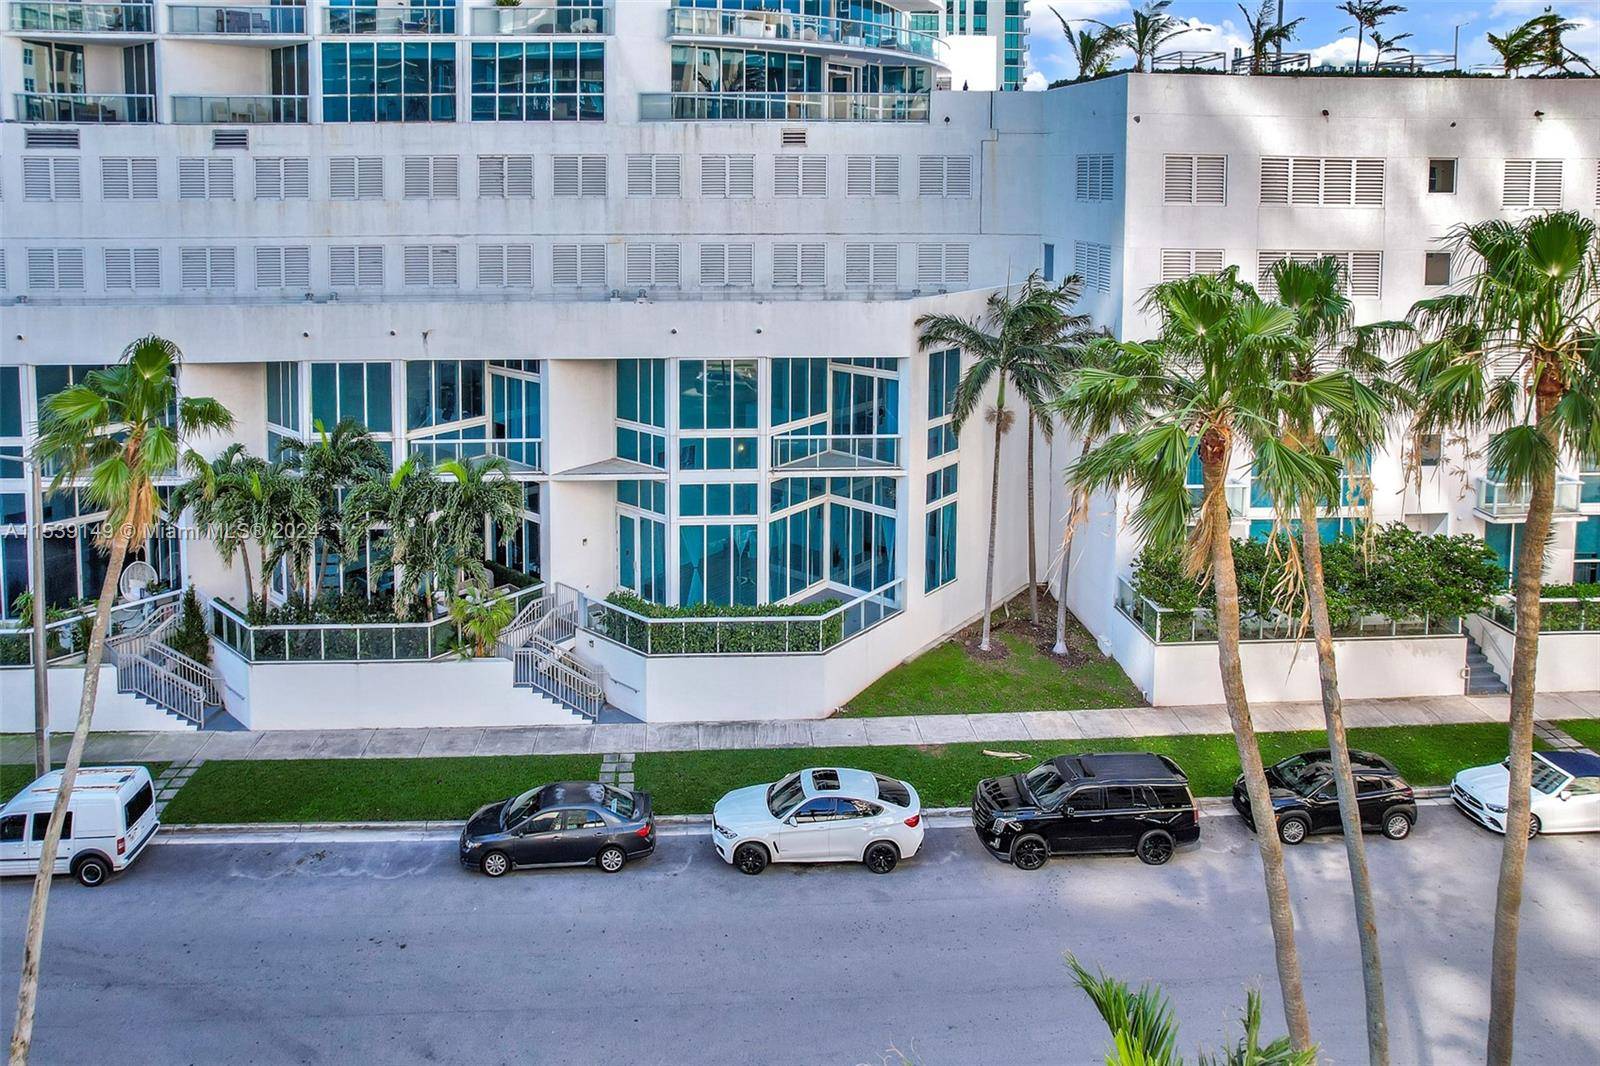 Unique loft style townhome located in the heart of Edgewater, just a short distance from Biscayne Bay.